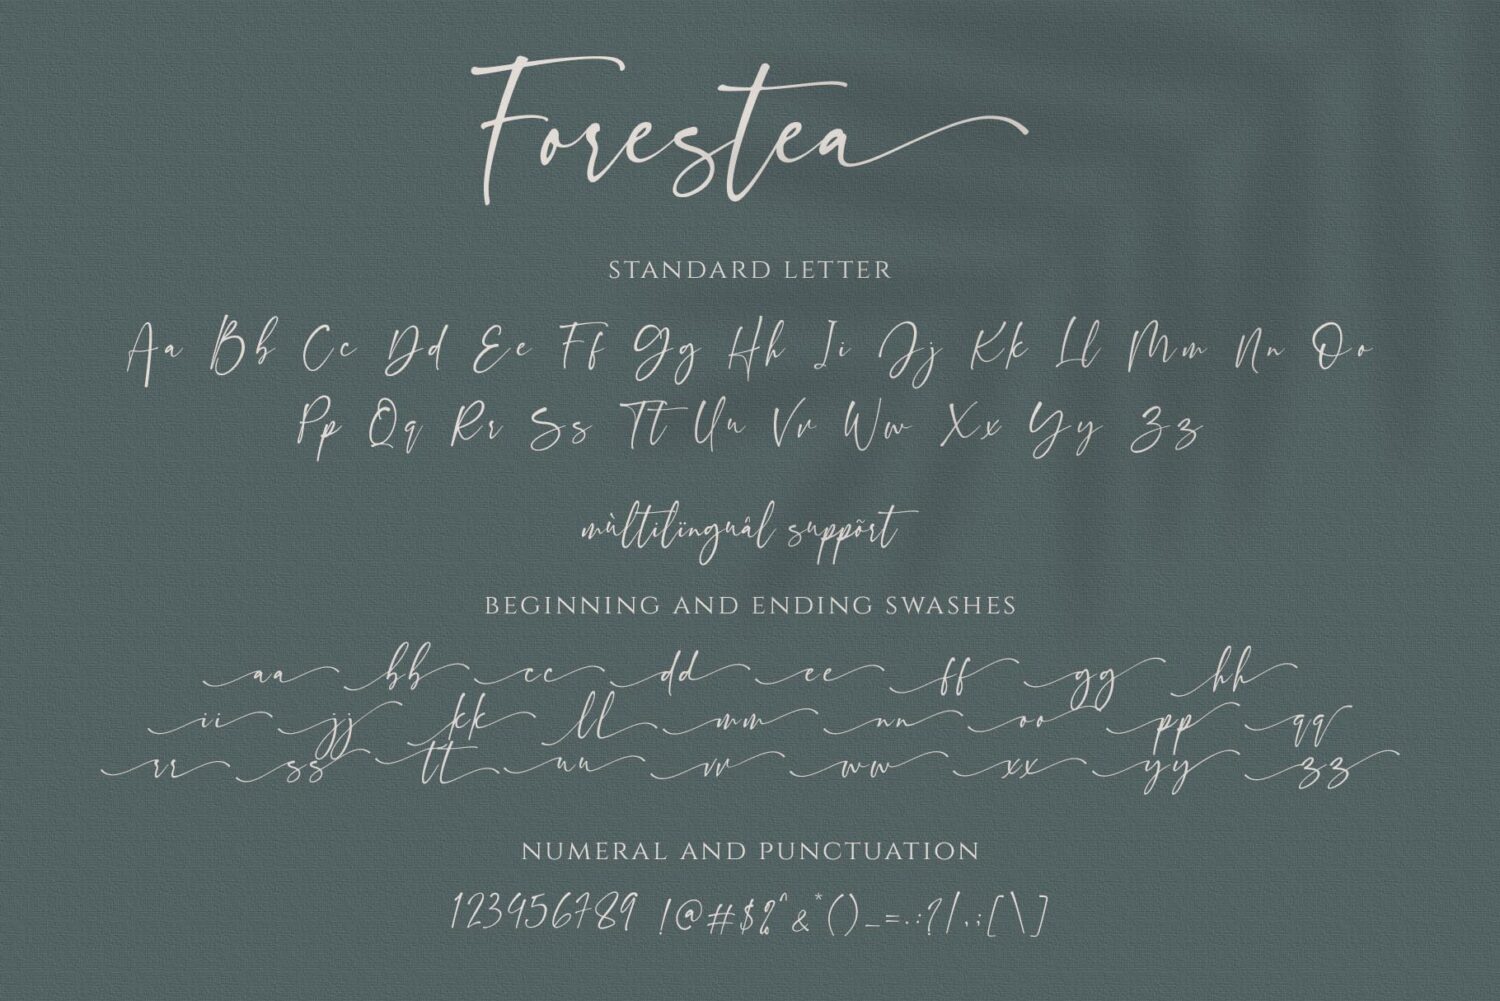 Forestea Free Font